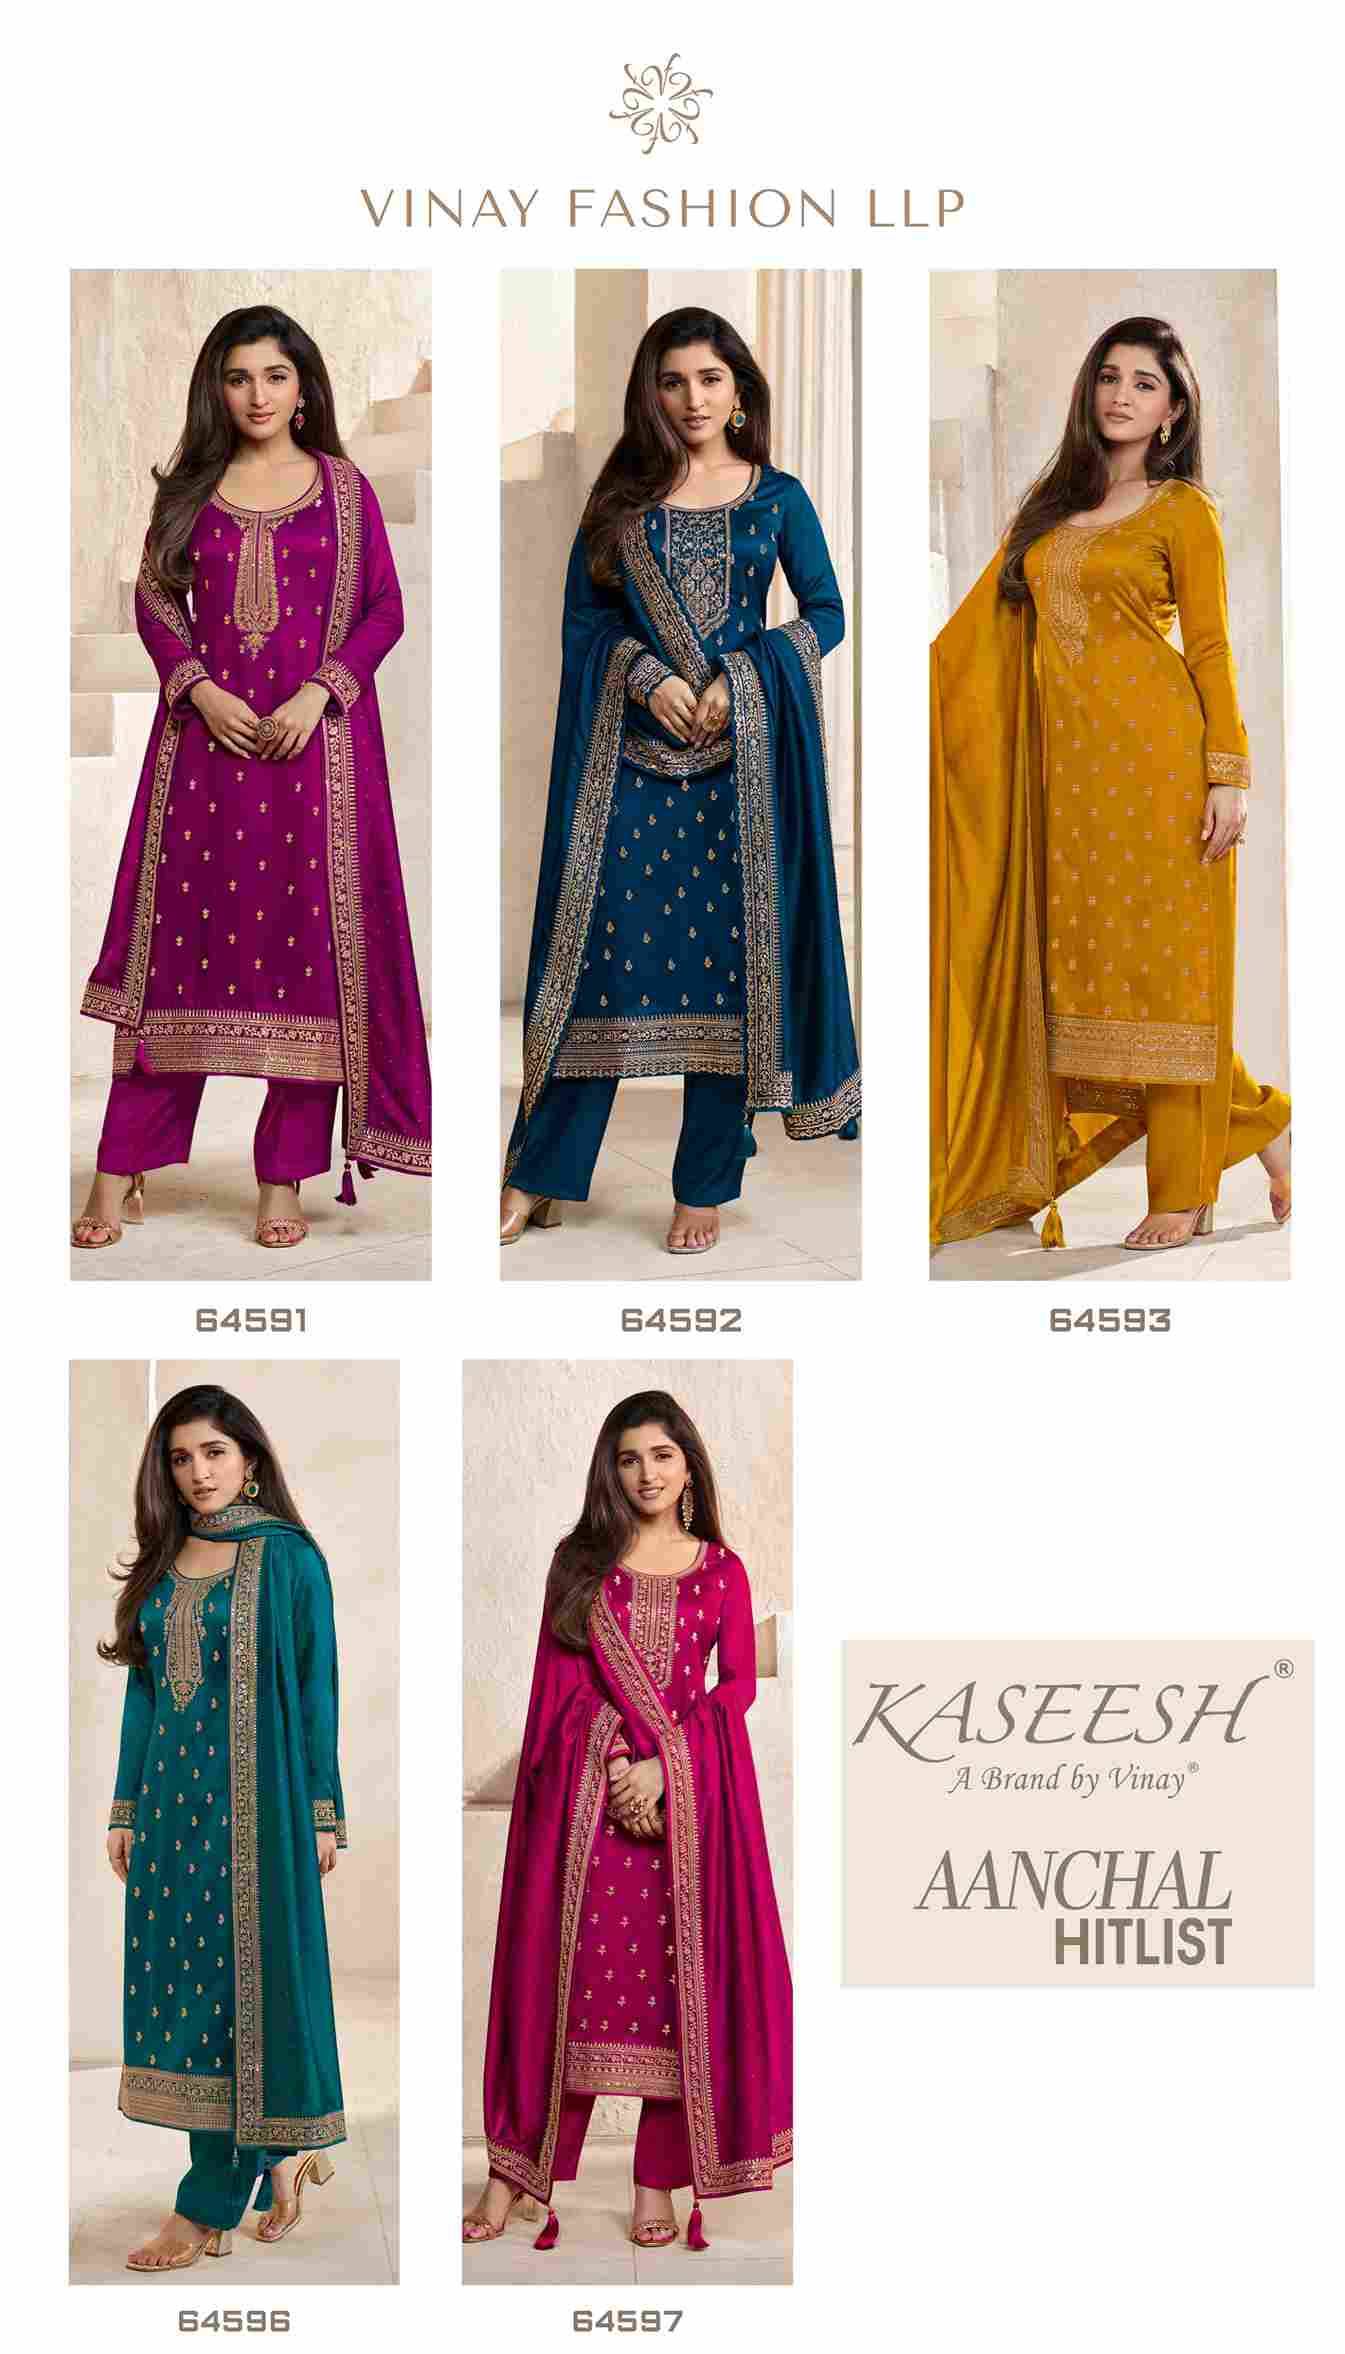 Kaseesh Aanchal Hitlist By Vinay Fashion Beautiful Festive Suits Colorful Stylish Fancy Casual Wear & Ethnic Wear Georgette Silk Dresses At Wholesale Price